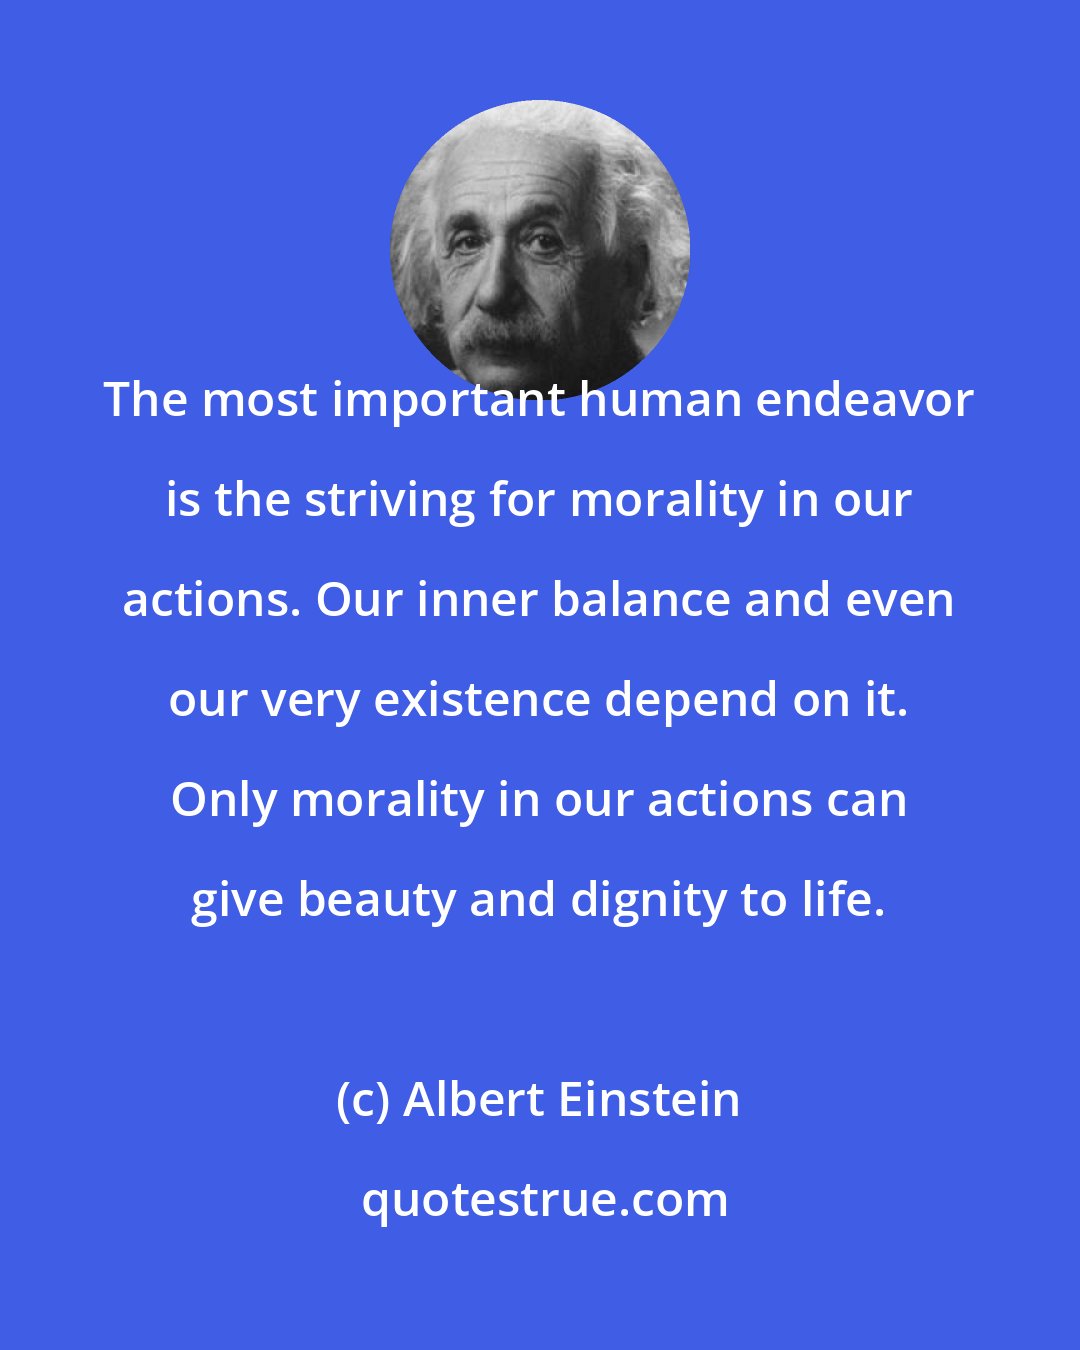 Albert Einstein: The most important human endeavor is the striving for morality in our actions. Our inner balance and even our very existence depend on it. Only morality in our actions can give beauty and dignity to life.